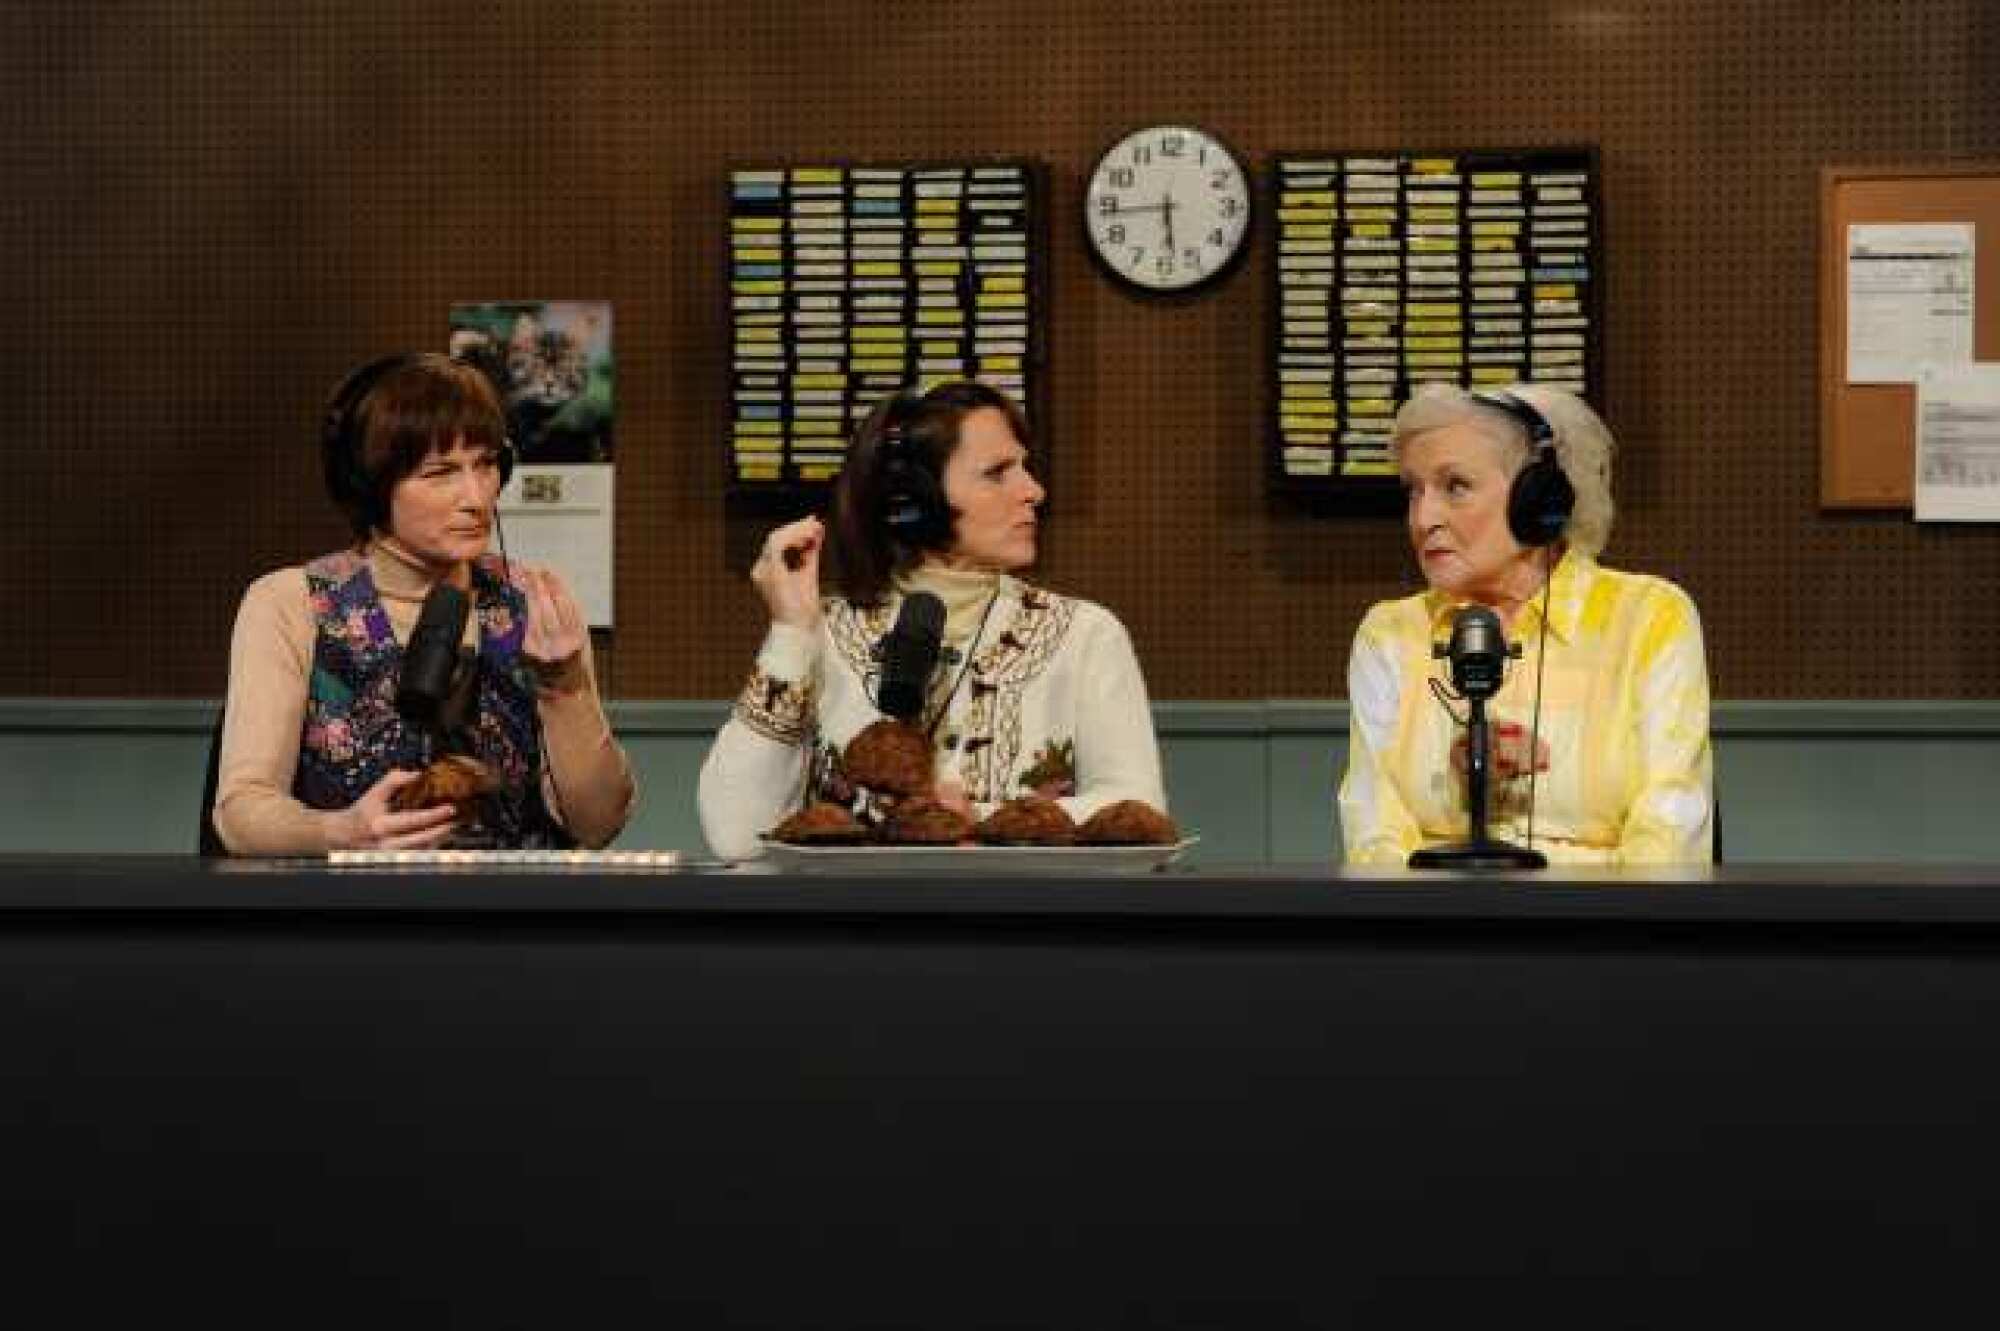 Betty White, right, on "Saturday Night Live" in 2010 with Ana Gasteyer, left, and Molly Shannon.